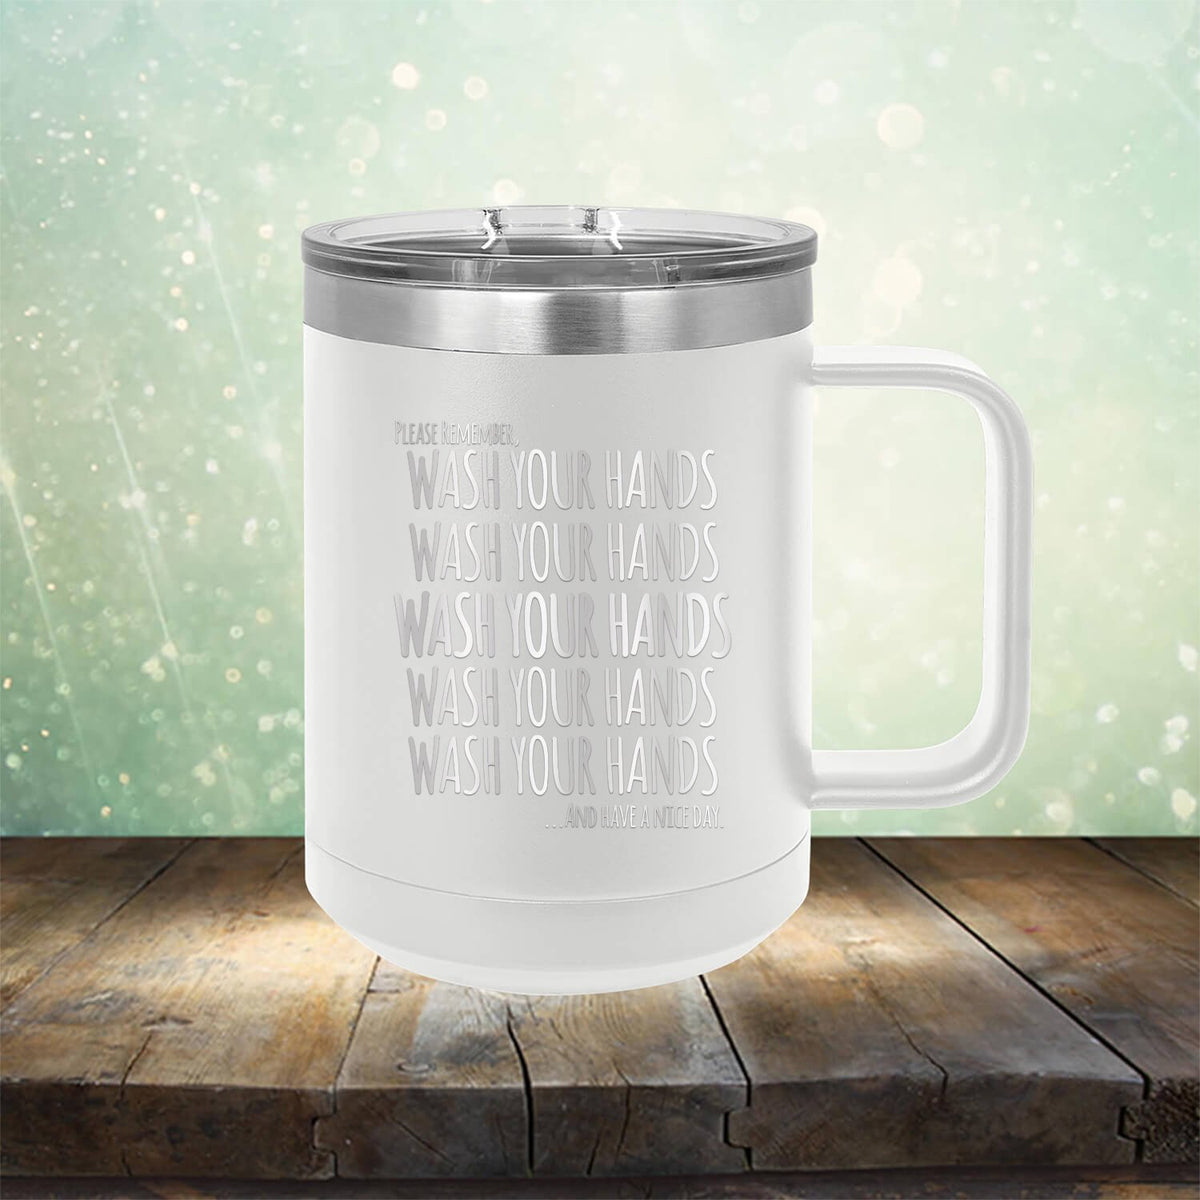 Wash Your Hands and Have A Nice Day - Laser Etched Tumbler Mug